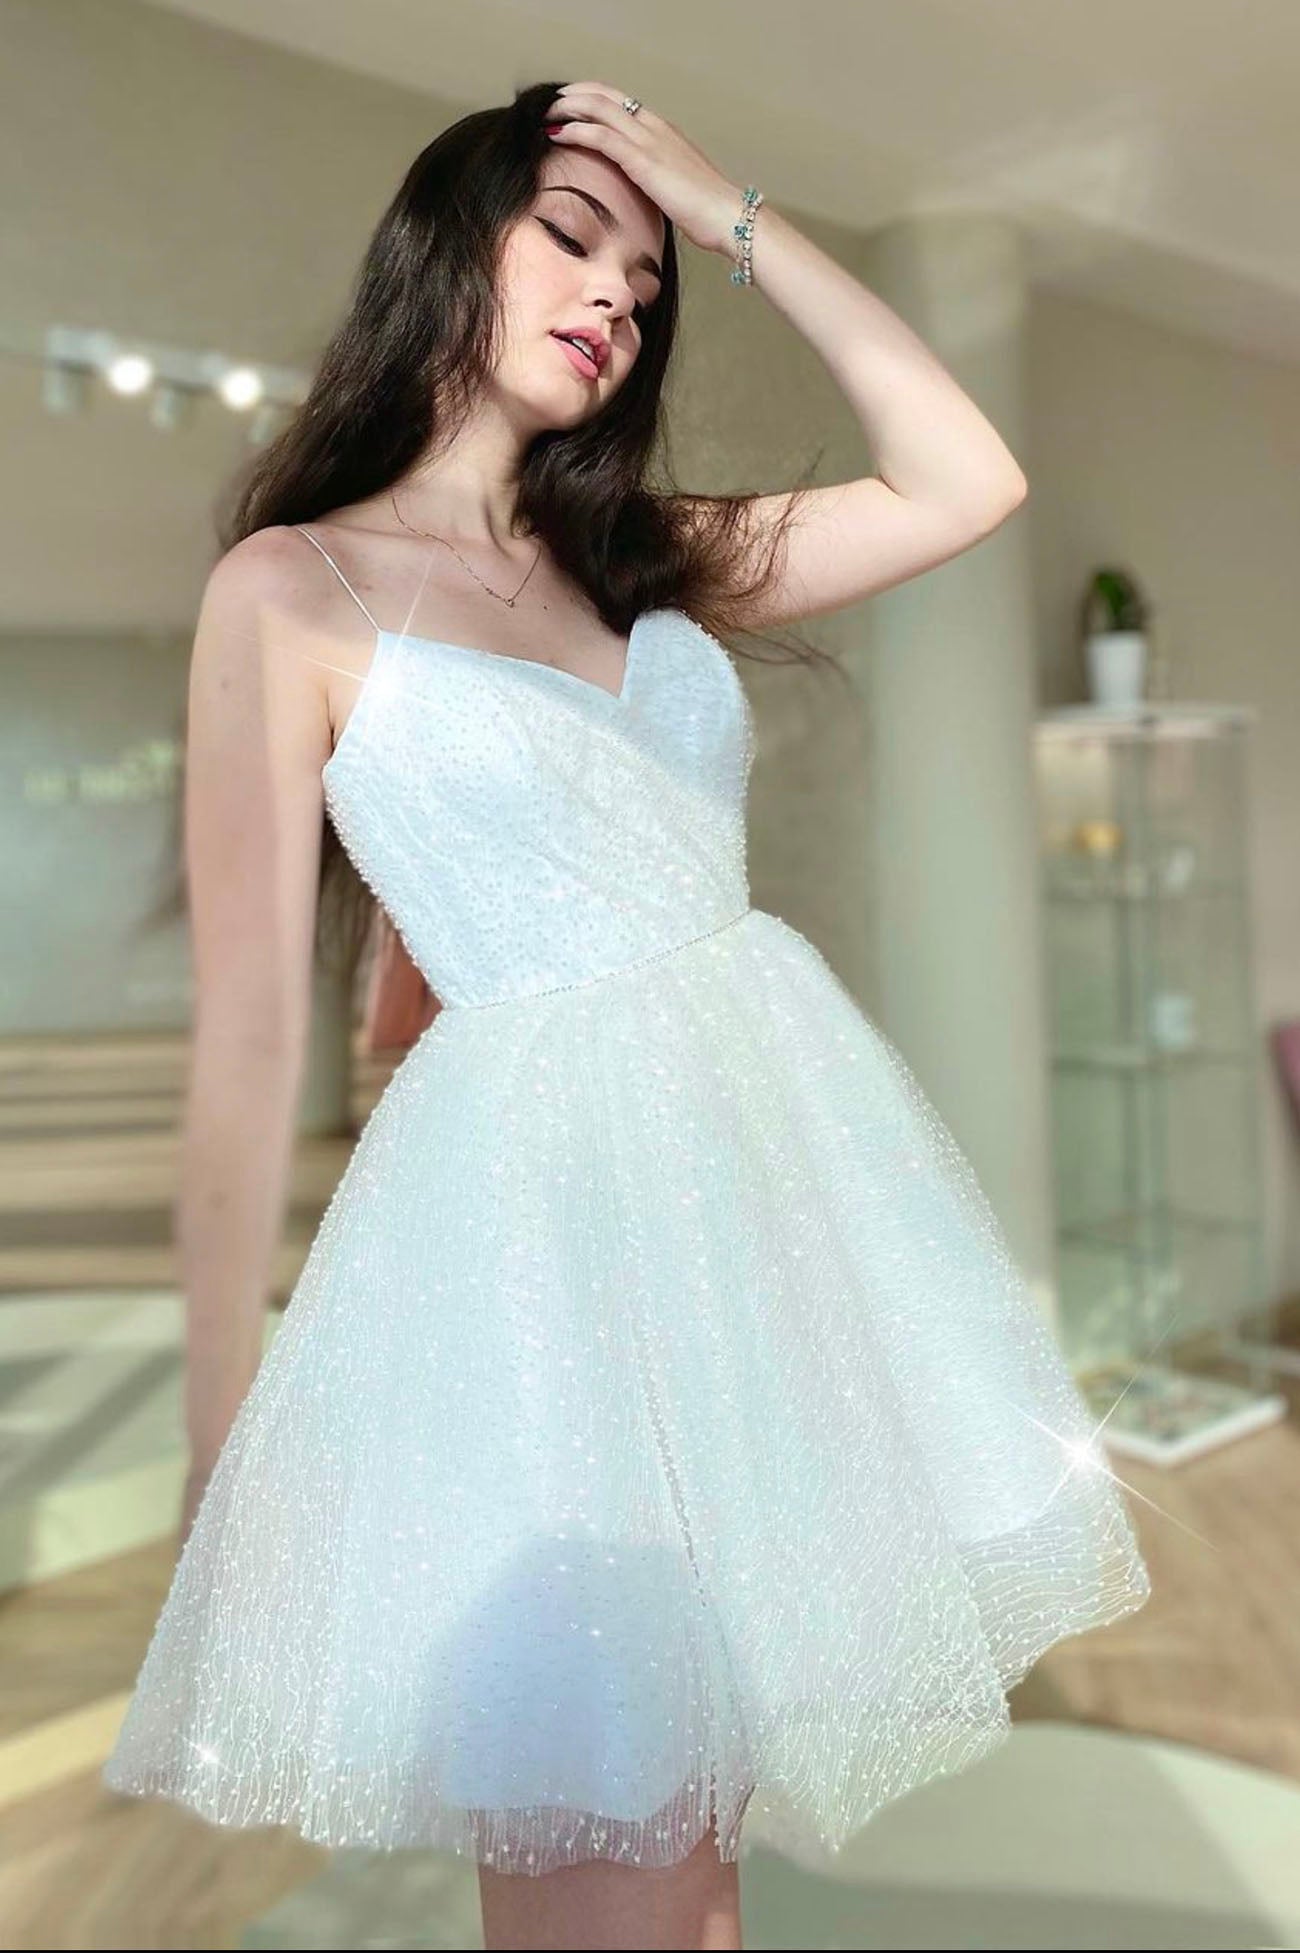 White Spaghetti Strap Tulle Short Prom Dress, Cute A-Line Homecoming Dress